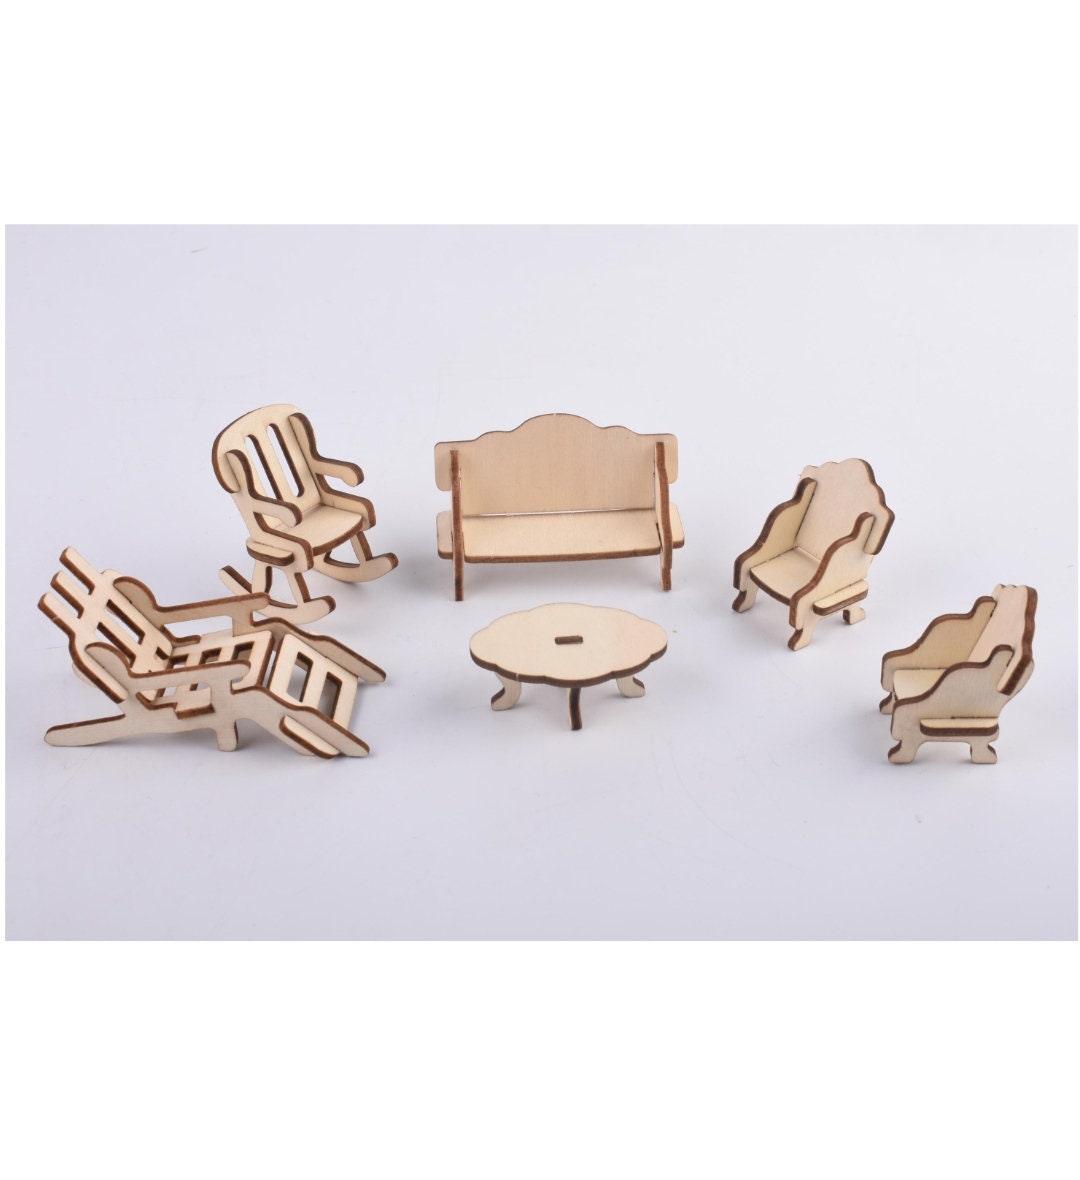 1:24 Scale - Dollhouse Furniture 34 Psc Set with Living Room, Kitchen, Bedroom and Bathroom Furniture Miniature Set - Dollhouse Furniture